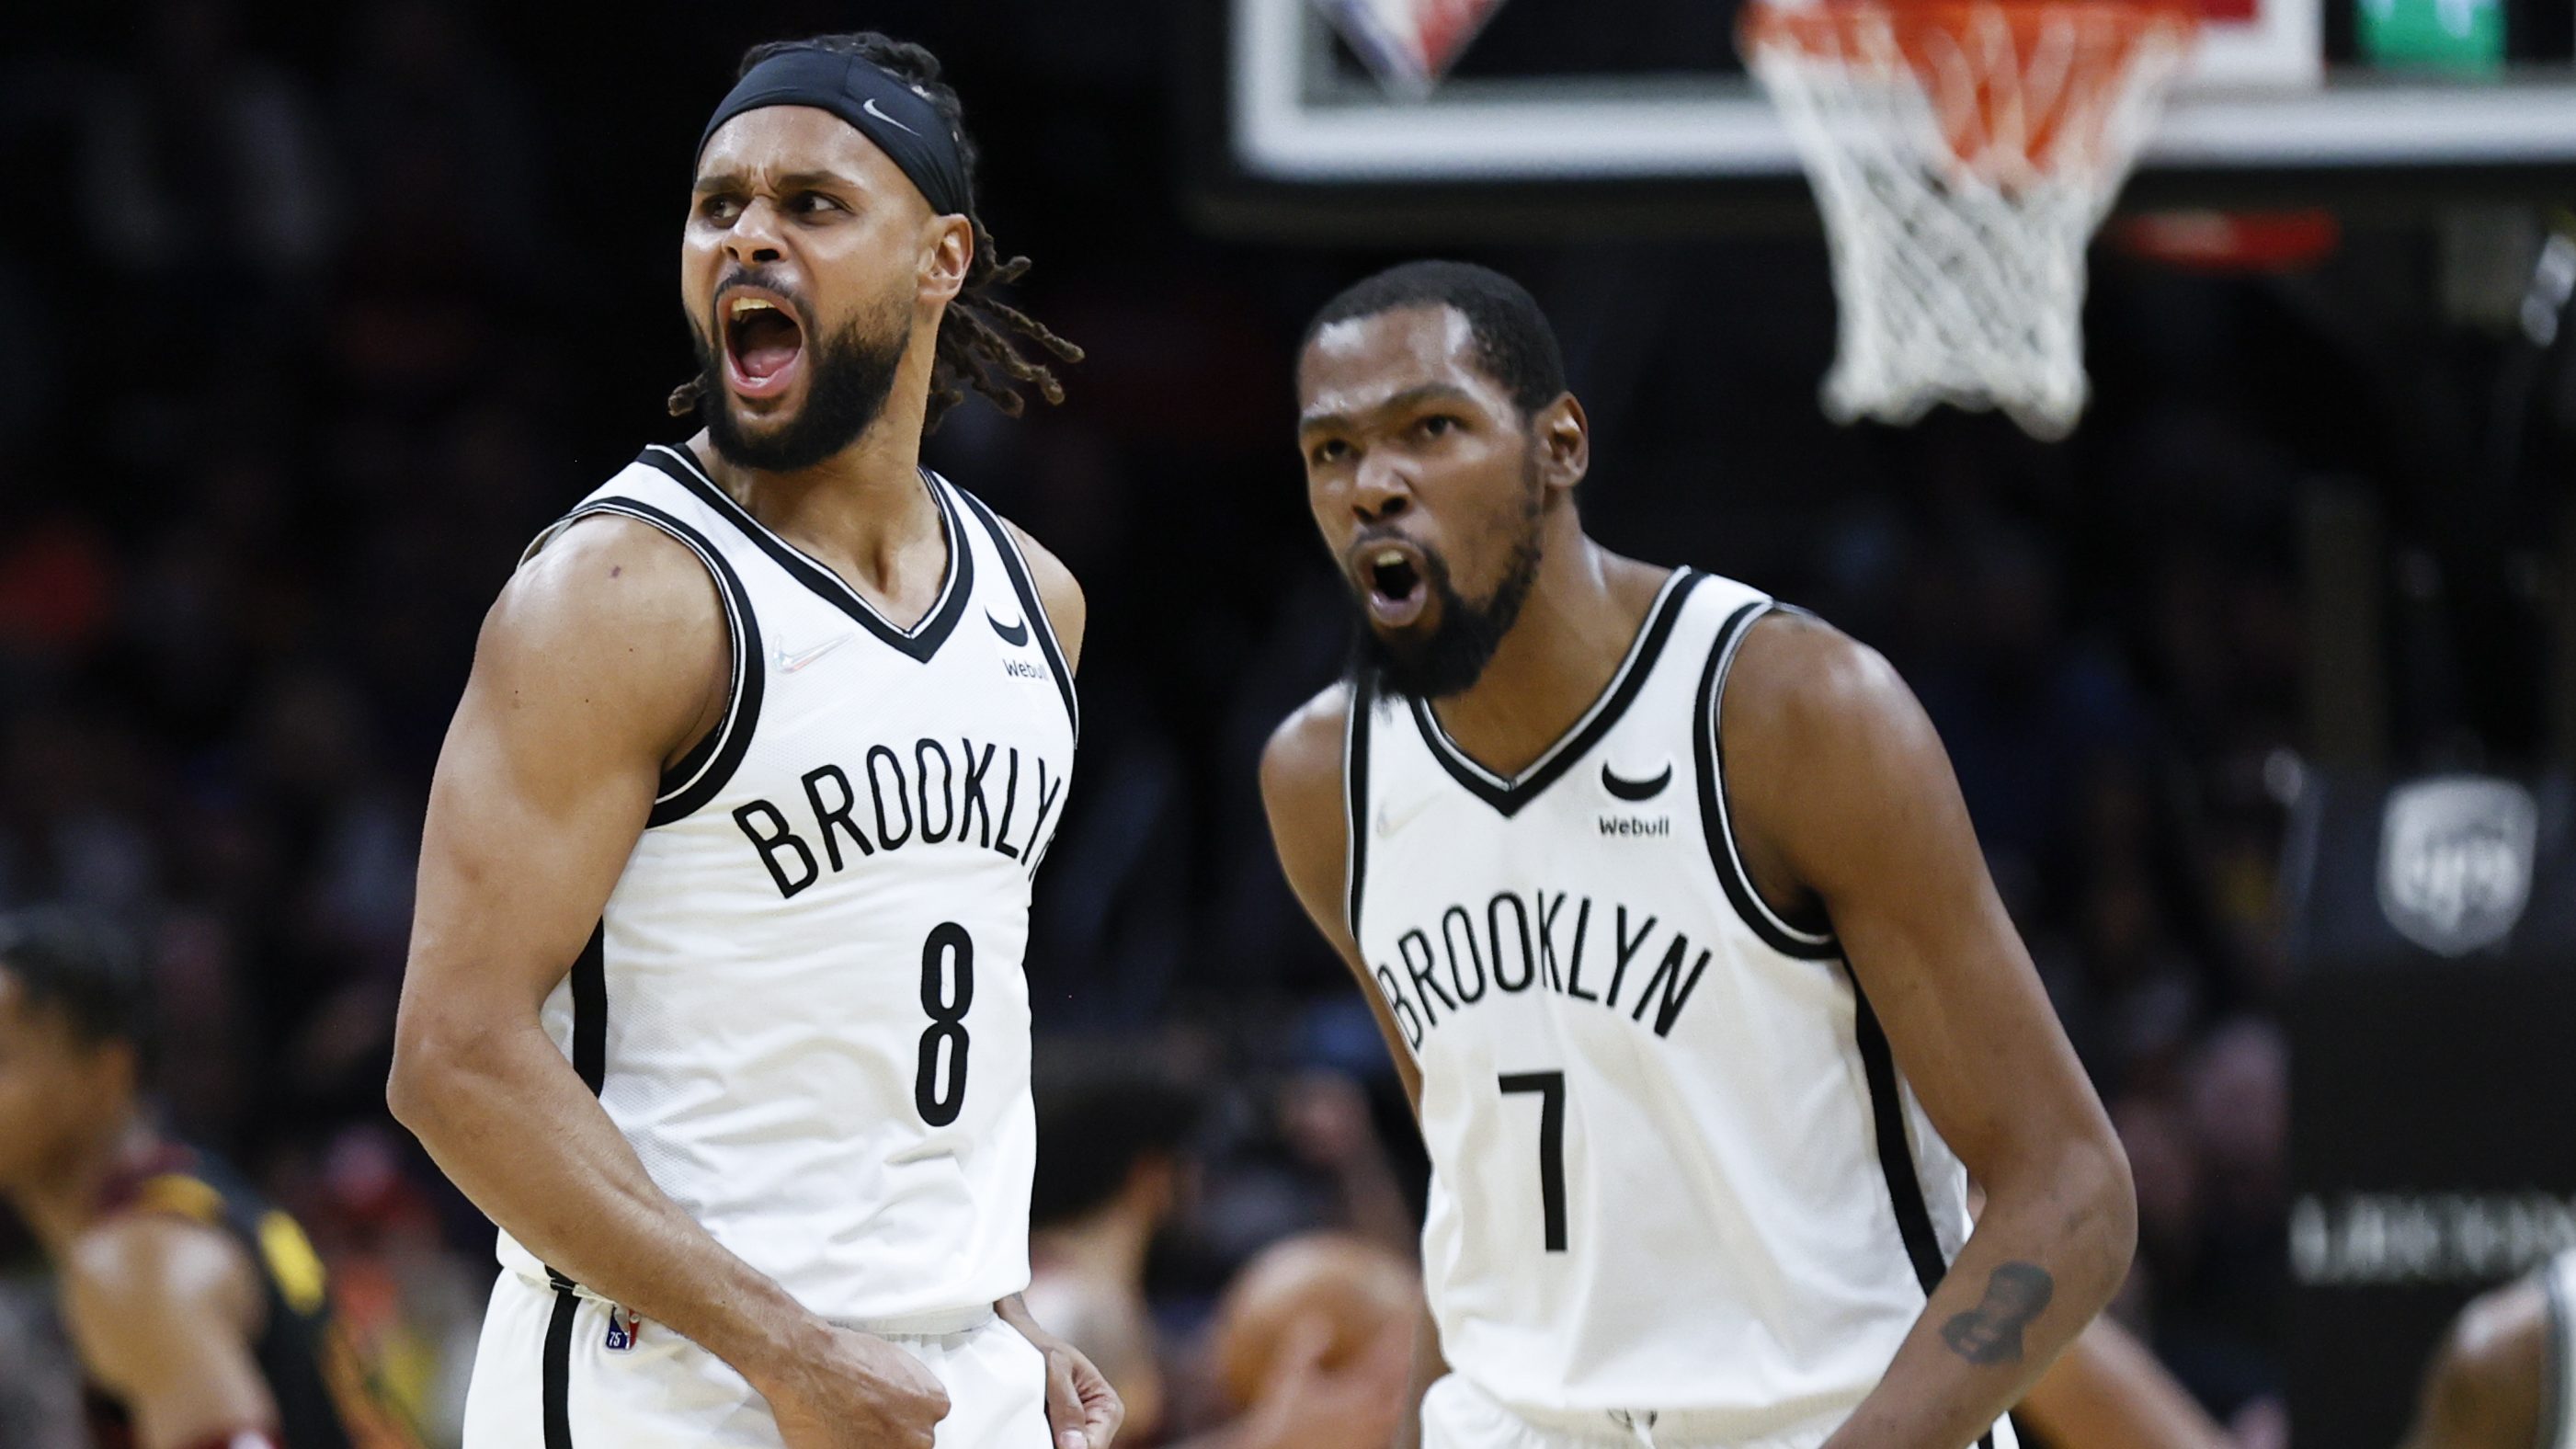 Highlights: Patty Mills re-ignites shooting form ahead of 3-point